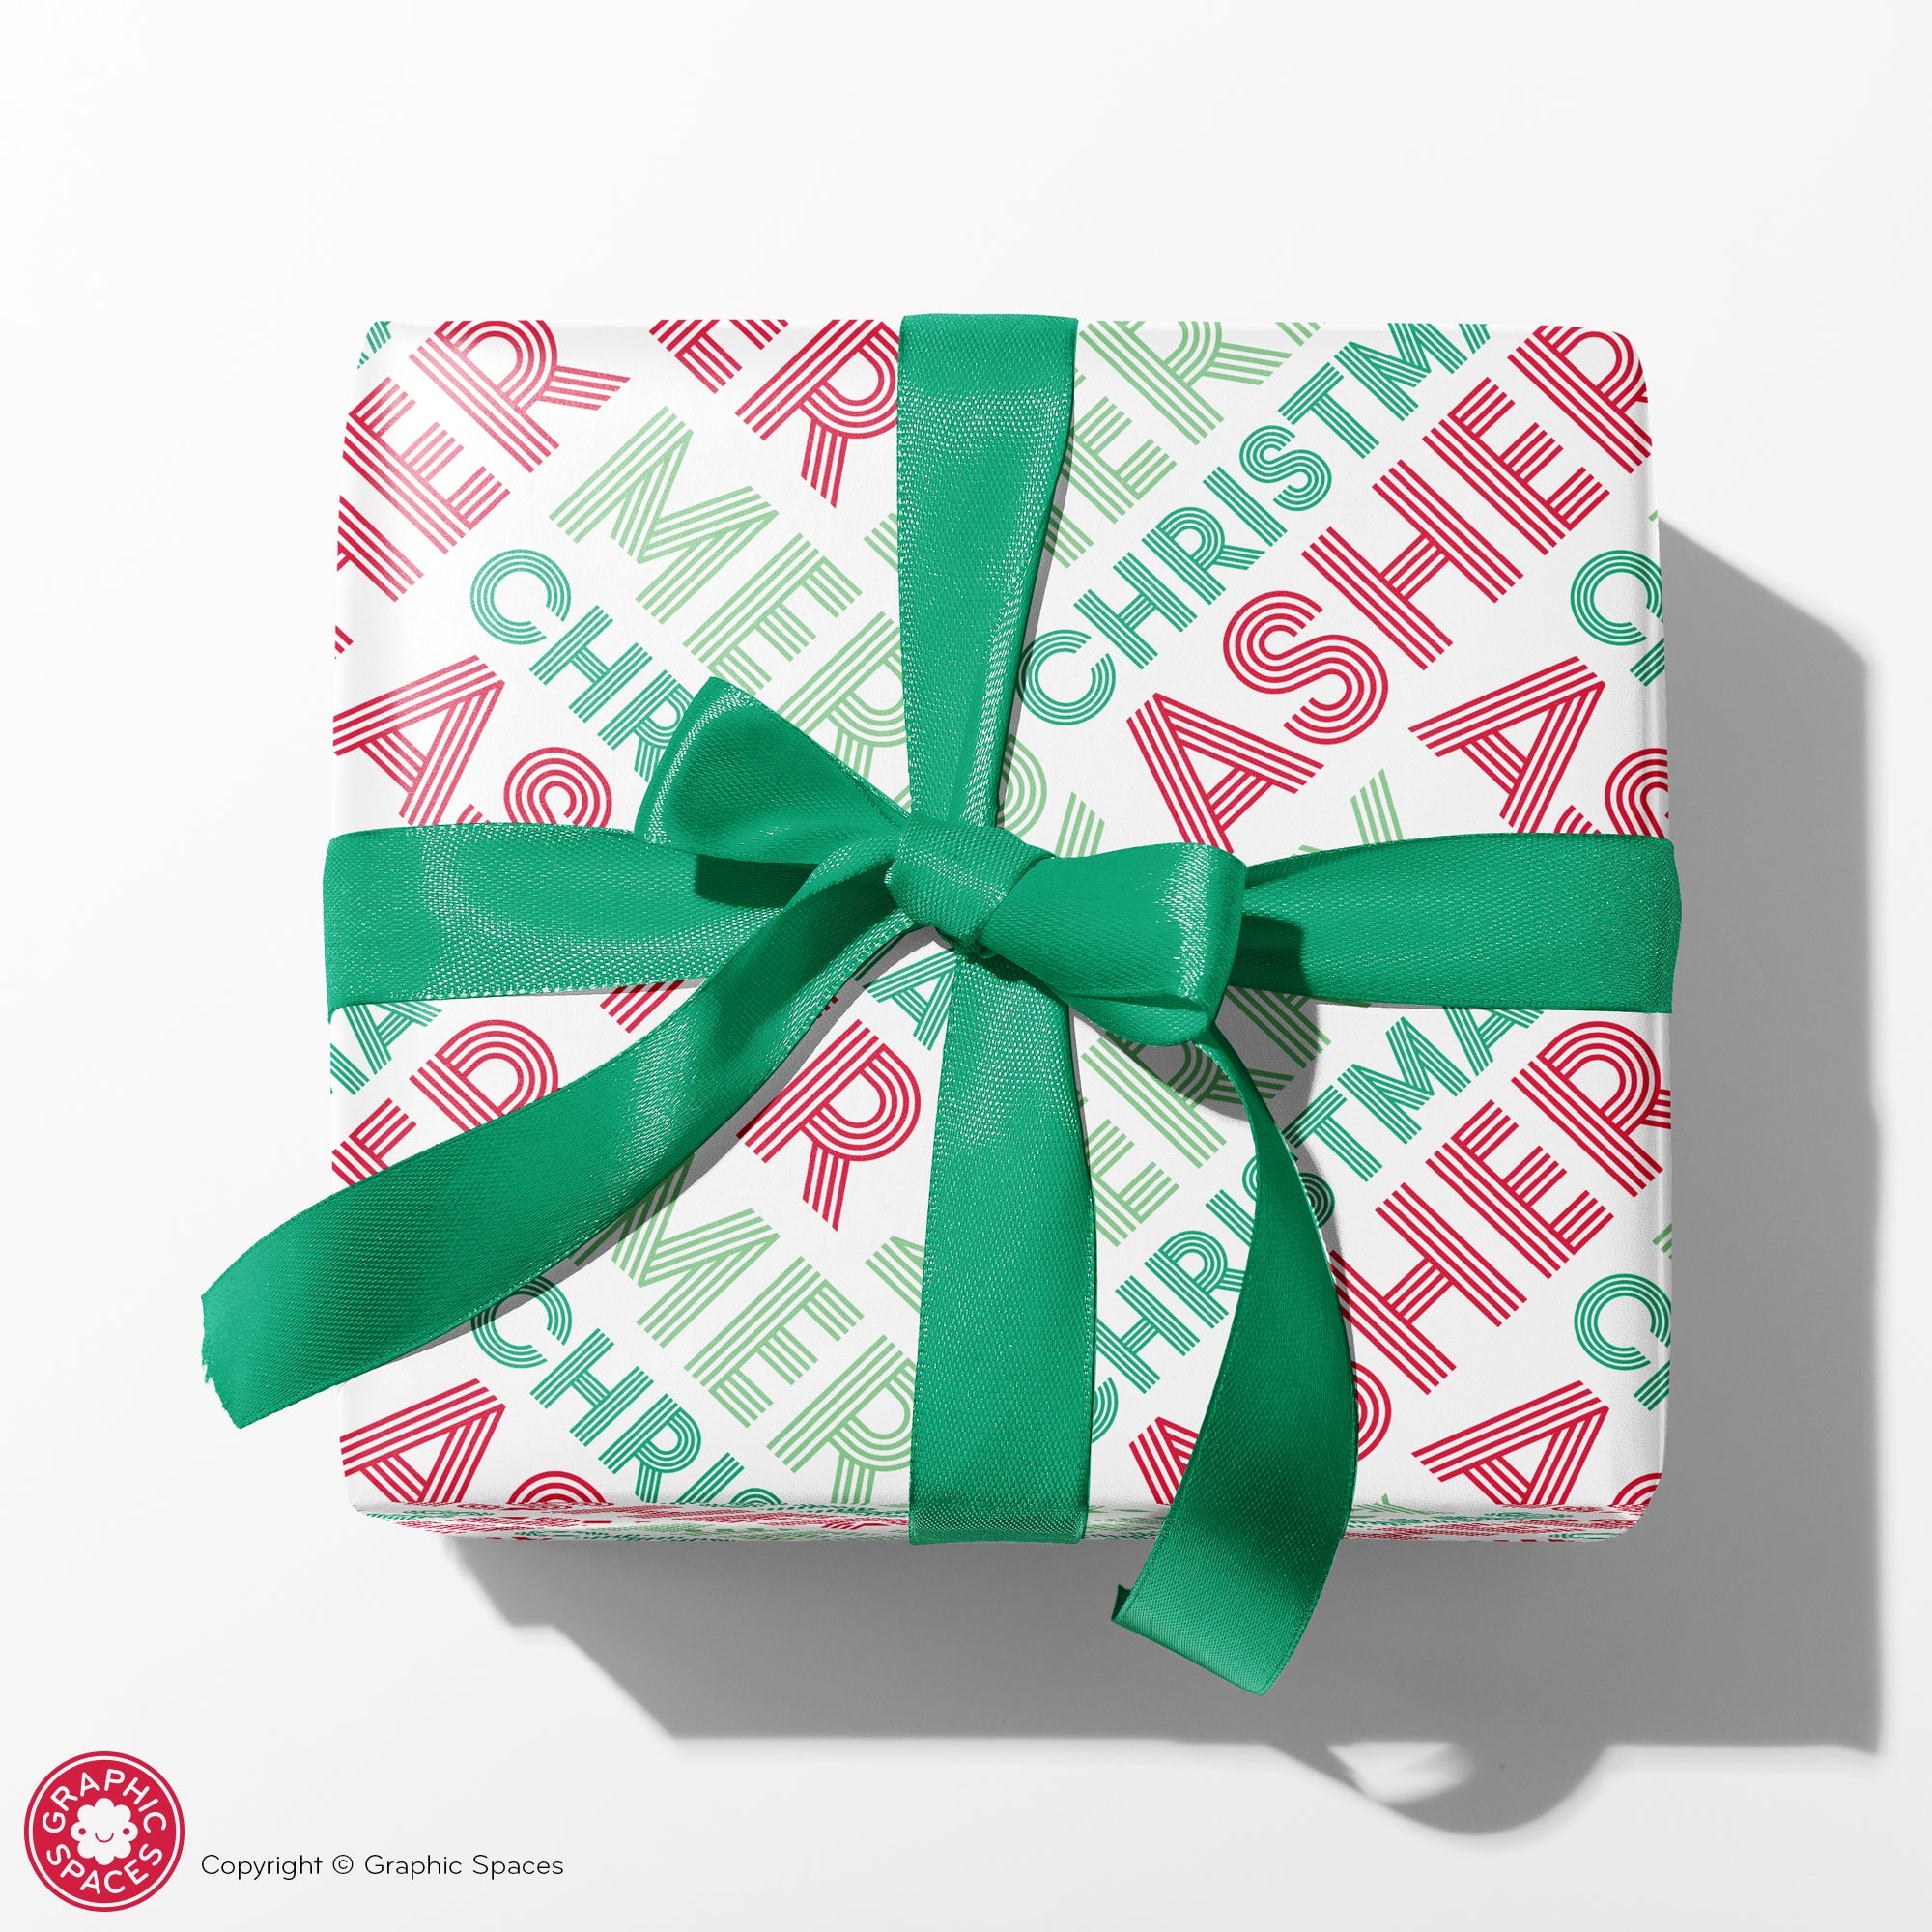 Personalised Customised Gift Wrapping Paper Christmas Gift 